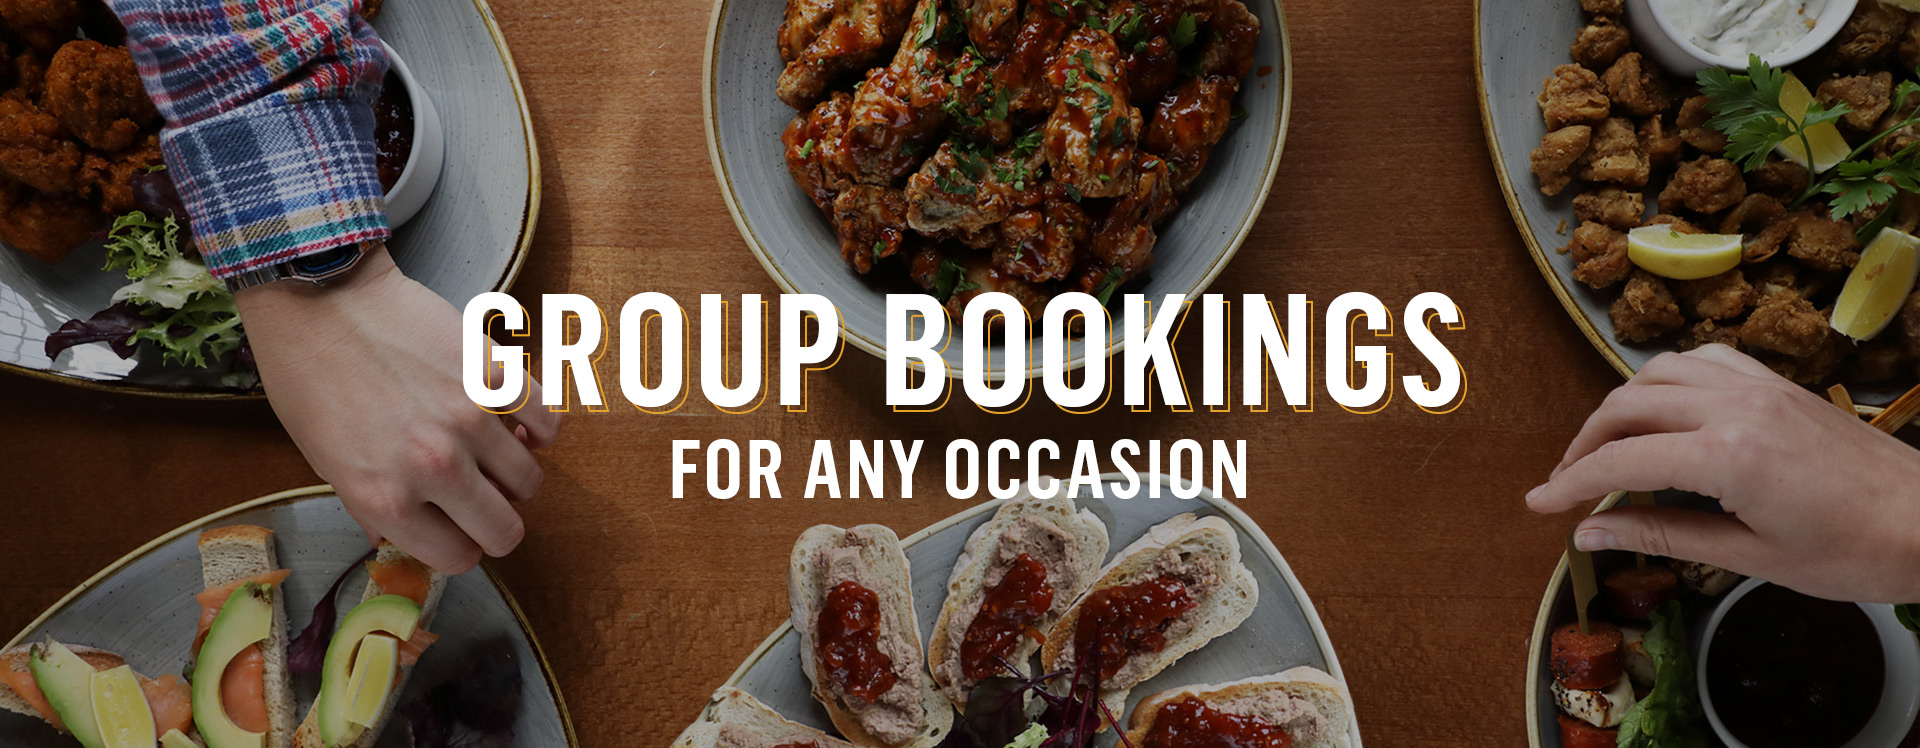 Group Bookings at The Old Contemptibles